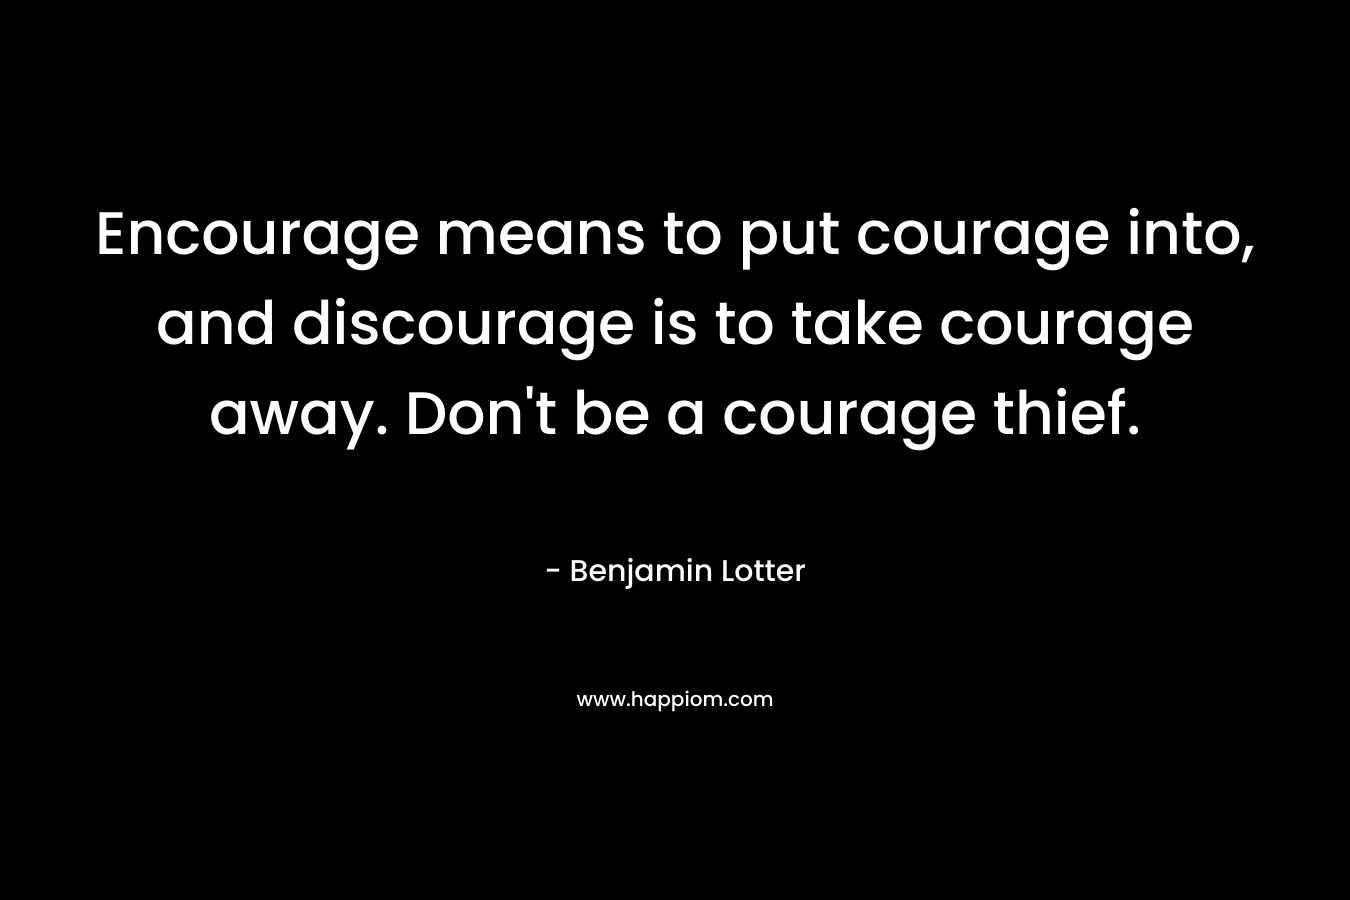 Encourage means to put courage into, and discourage is to take courage away. Don't be a courage thief.